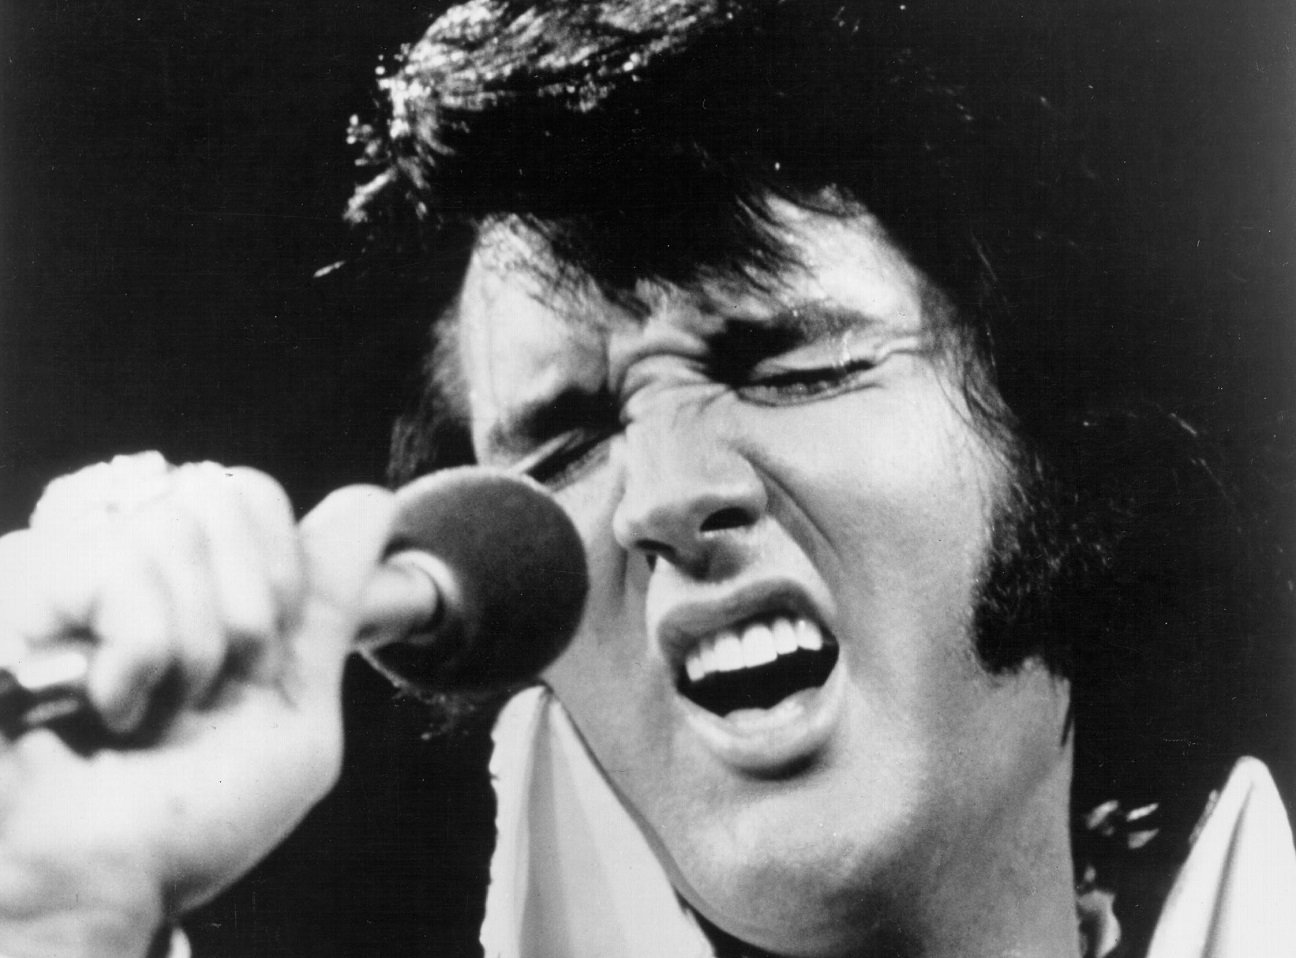 Closeup of Elvis Presley with his eyes closed singing into a microphone